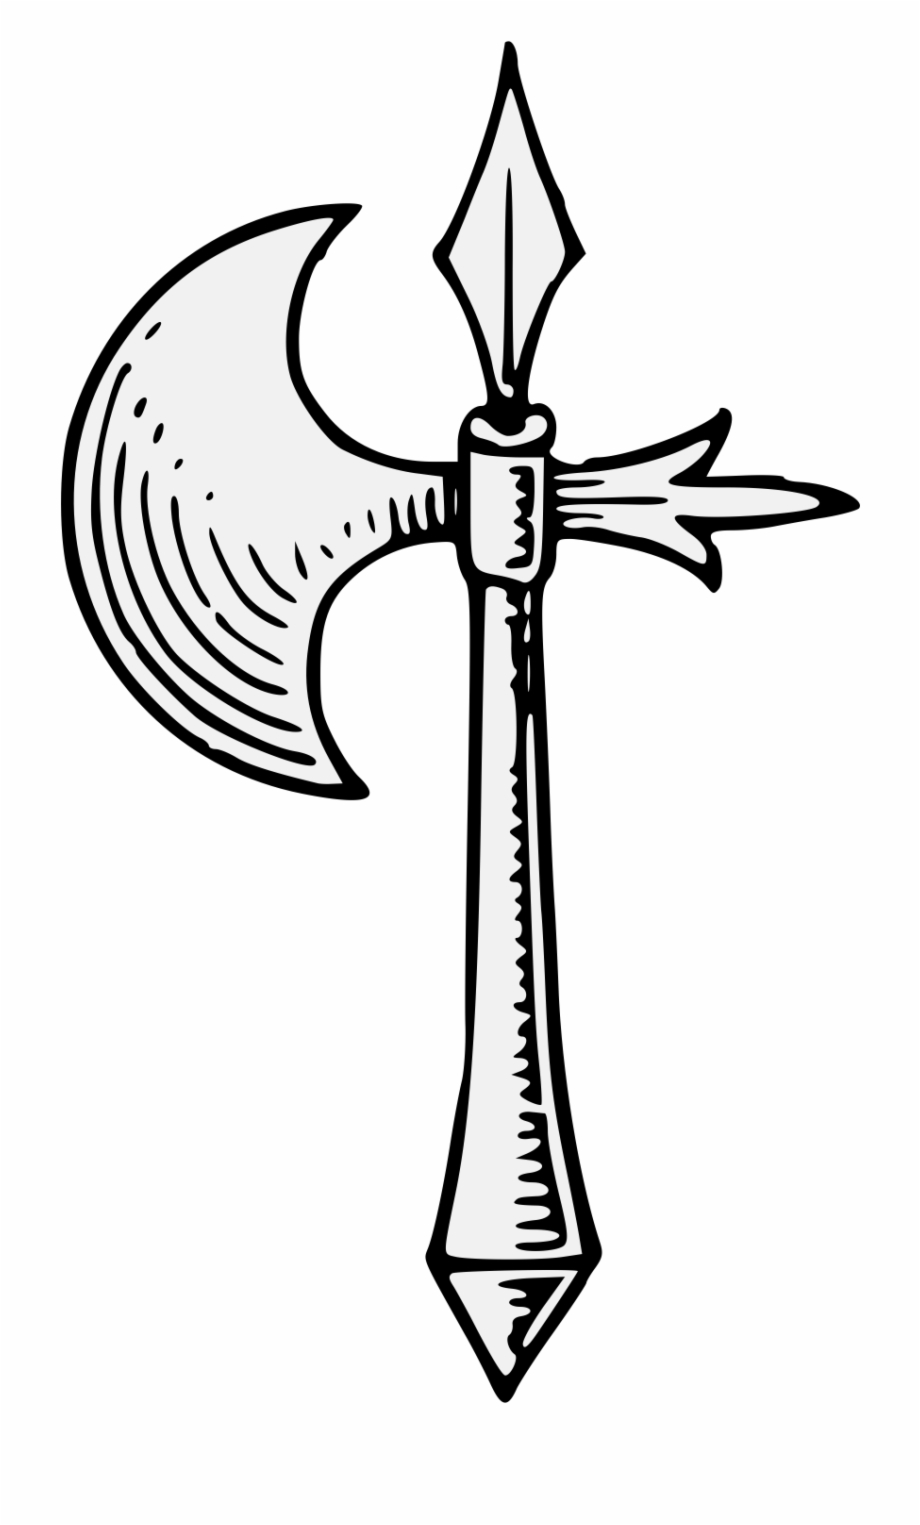 coat of arms axe
